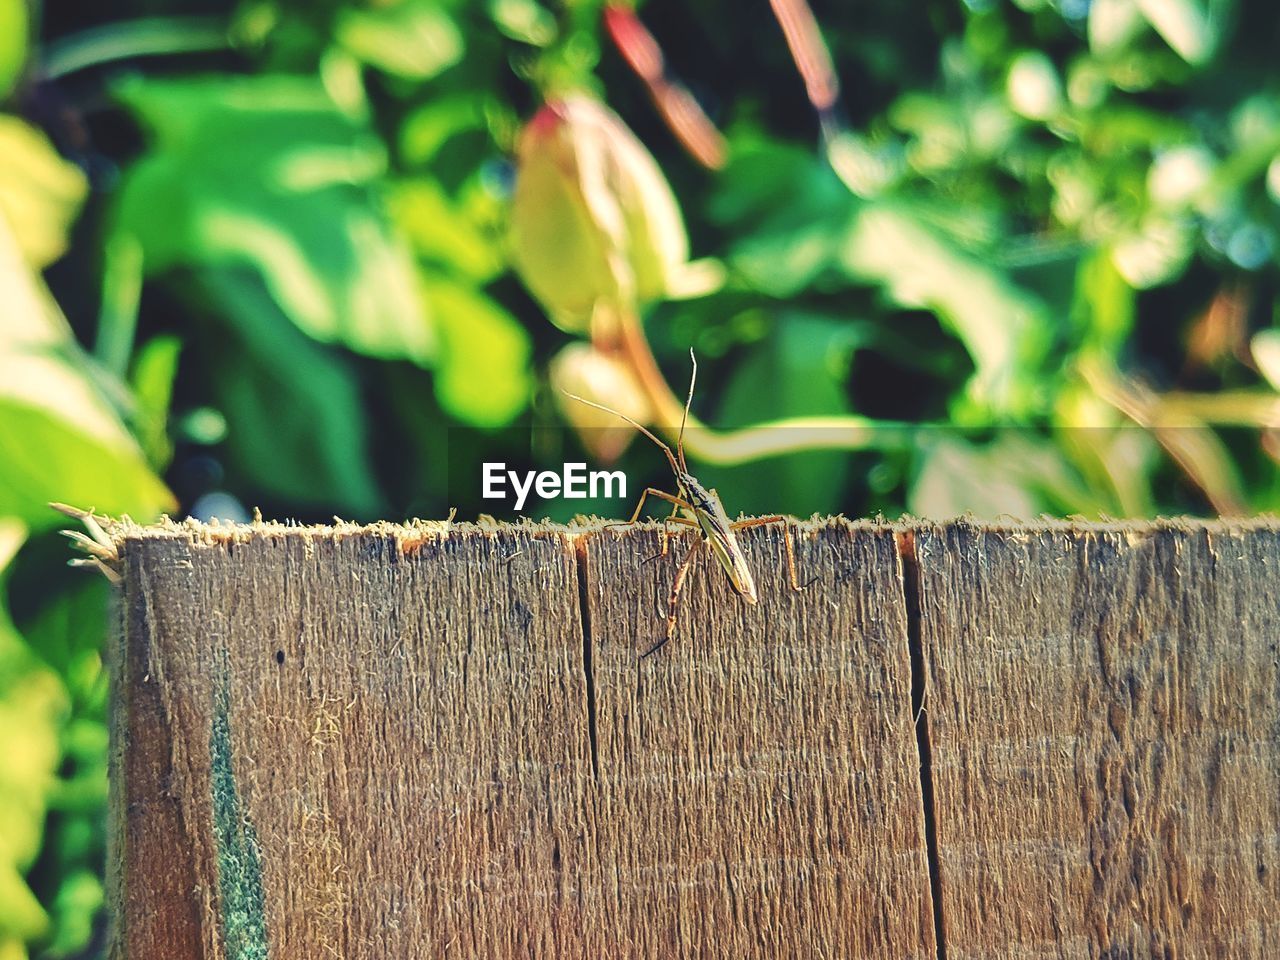 Close-up of insect on wooden fence